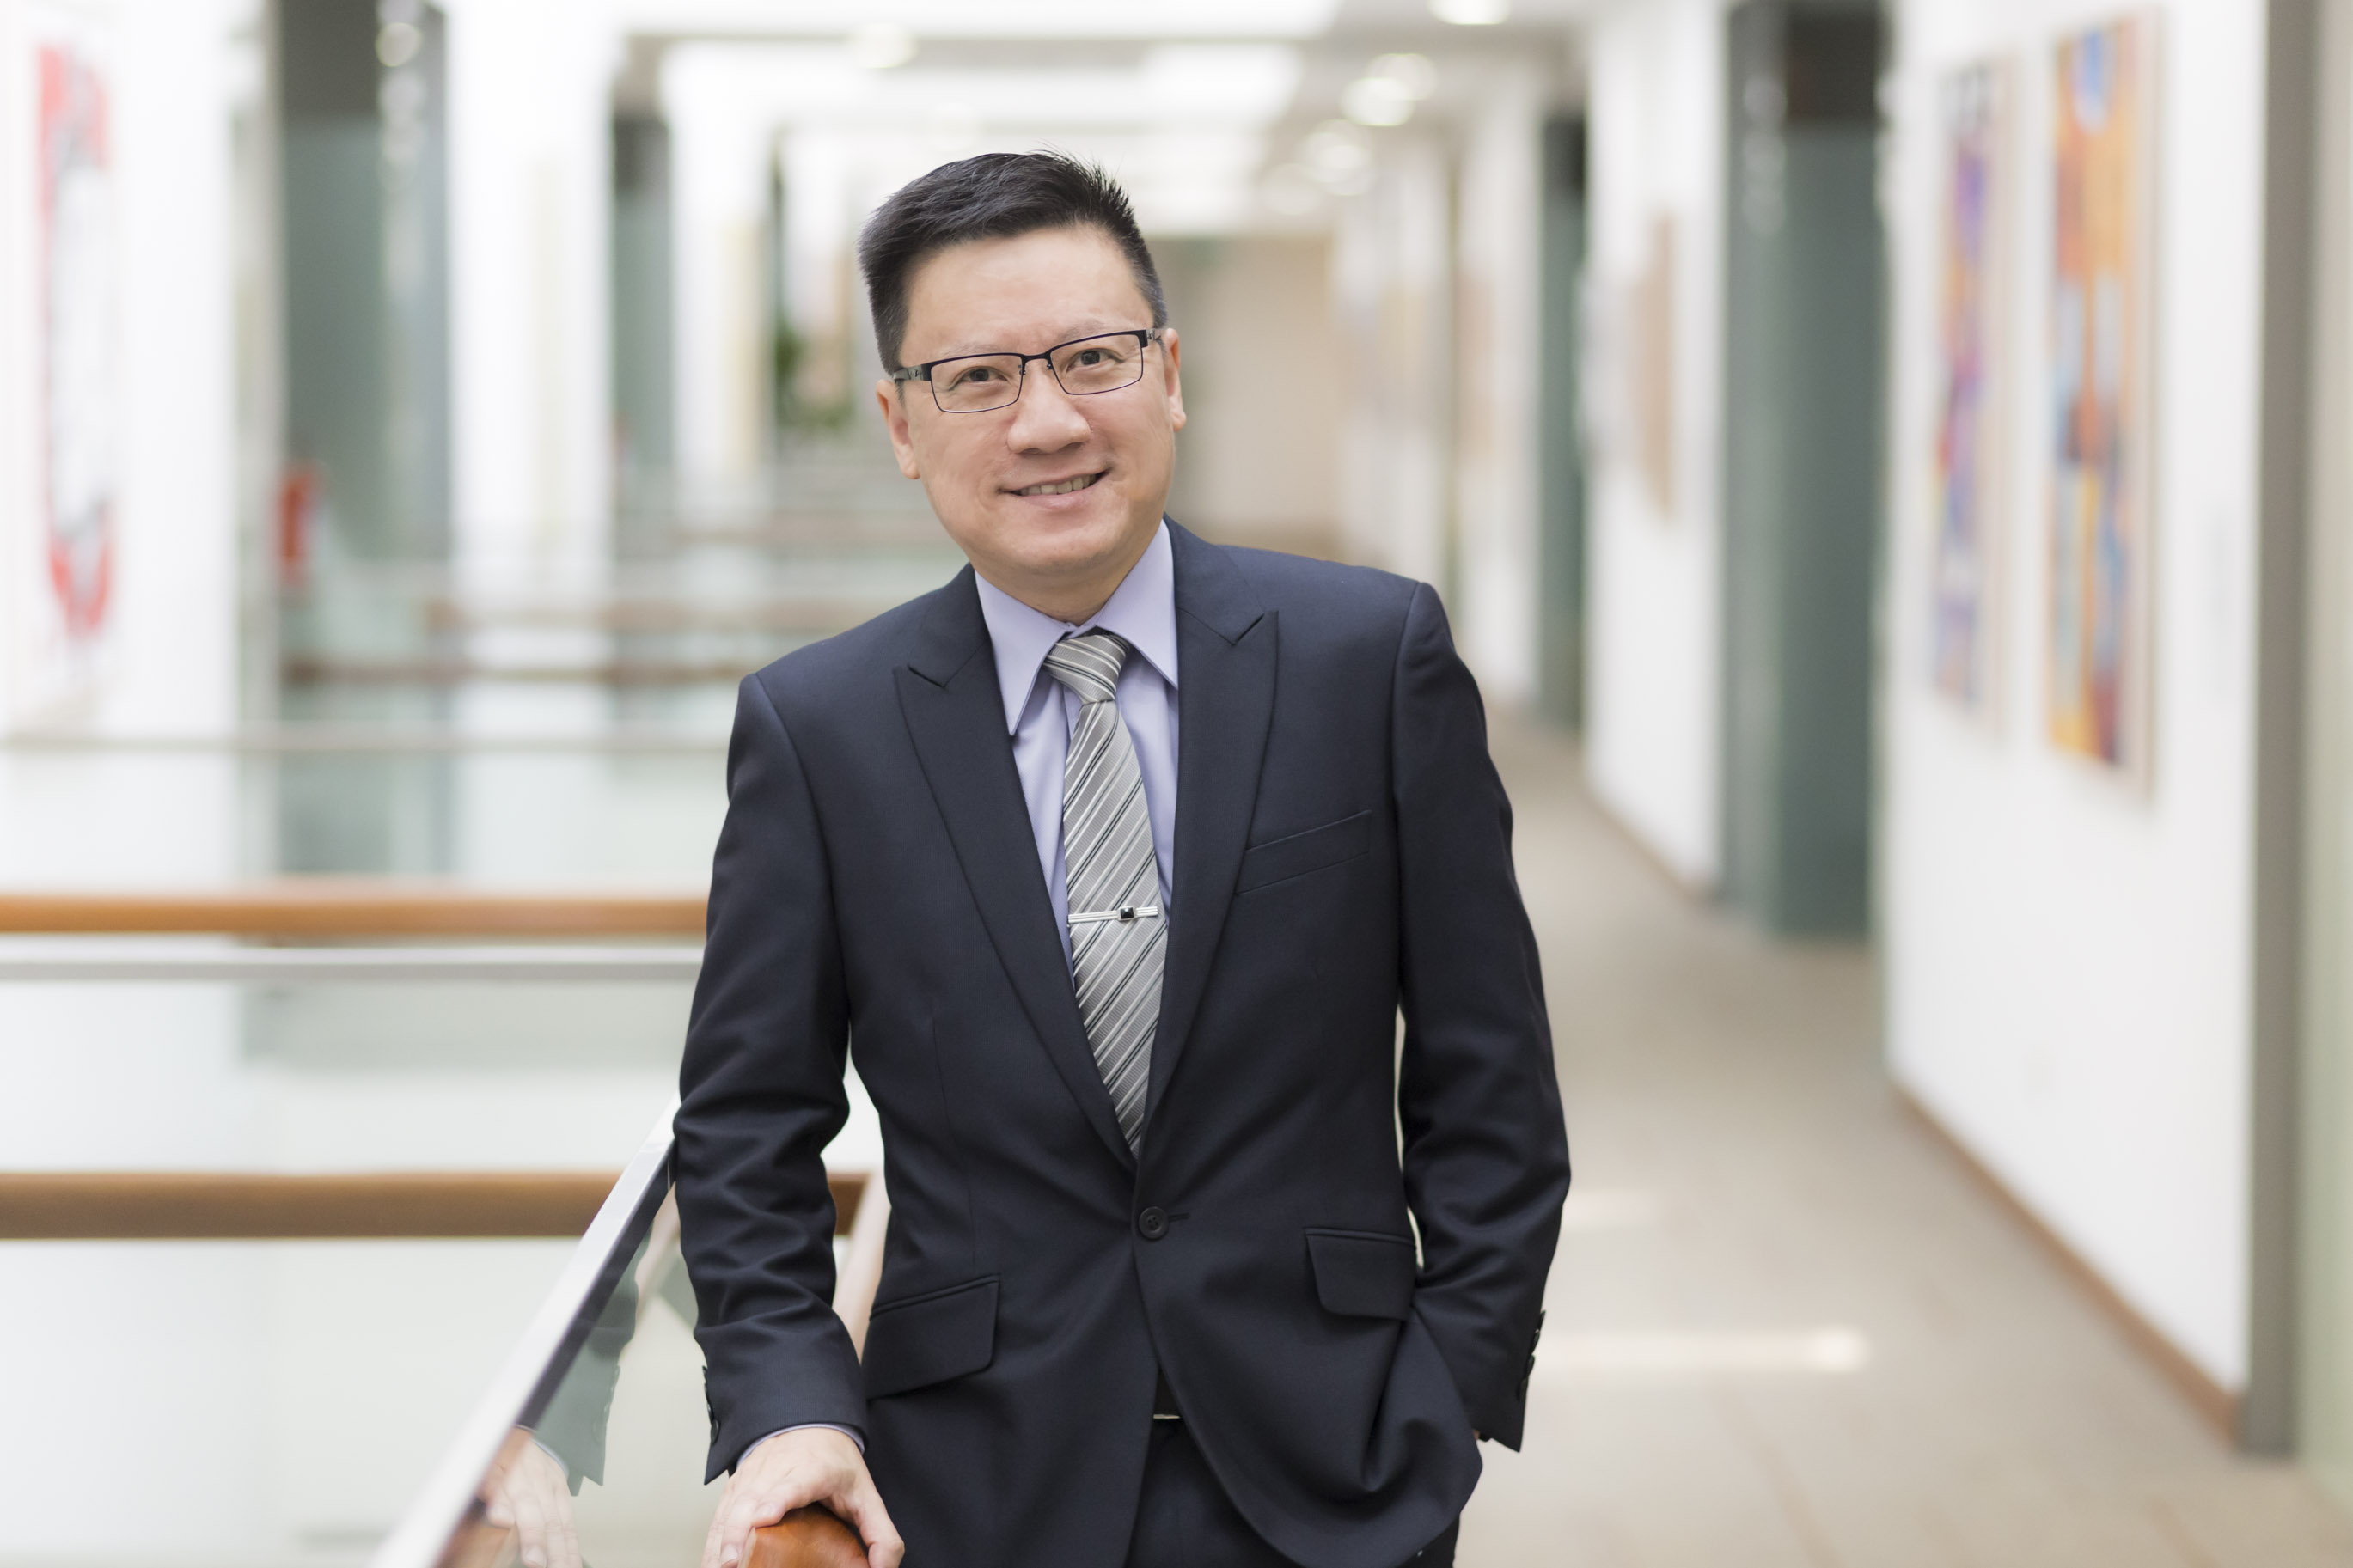 SMU Professor David Chan becomes first Singaporean and first Asian to receive the prestigious Raymond Katzell Award from the Society for Industrial and Organizational Psychology